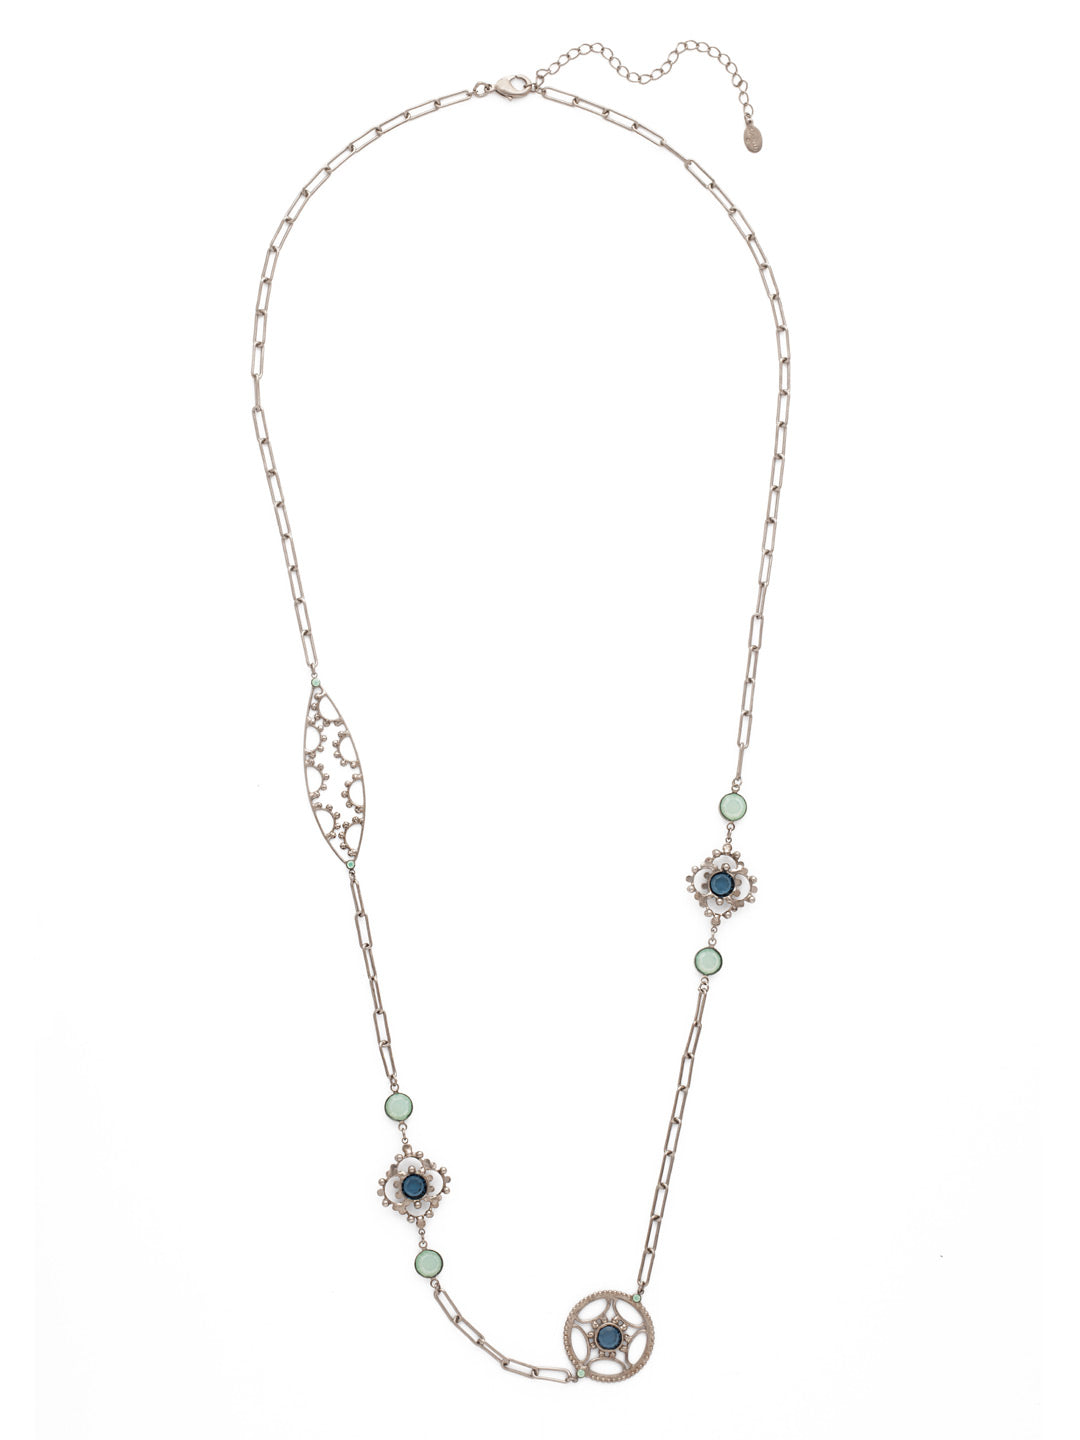 Everly Long Necklace - NES6ASNFT - <p>The Everly Long Necklace is a great layering piece that's unlike any other in your jewelry collection with its unique hand-soldered metalwork and clear, sparkling gems. From Sorrelli's Night Frost collection in our Antique Silver-tone finish.</p>